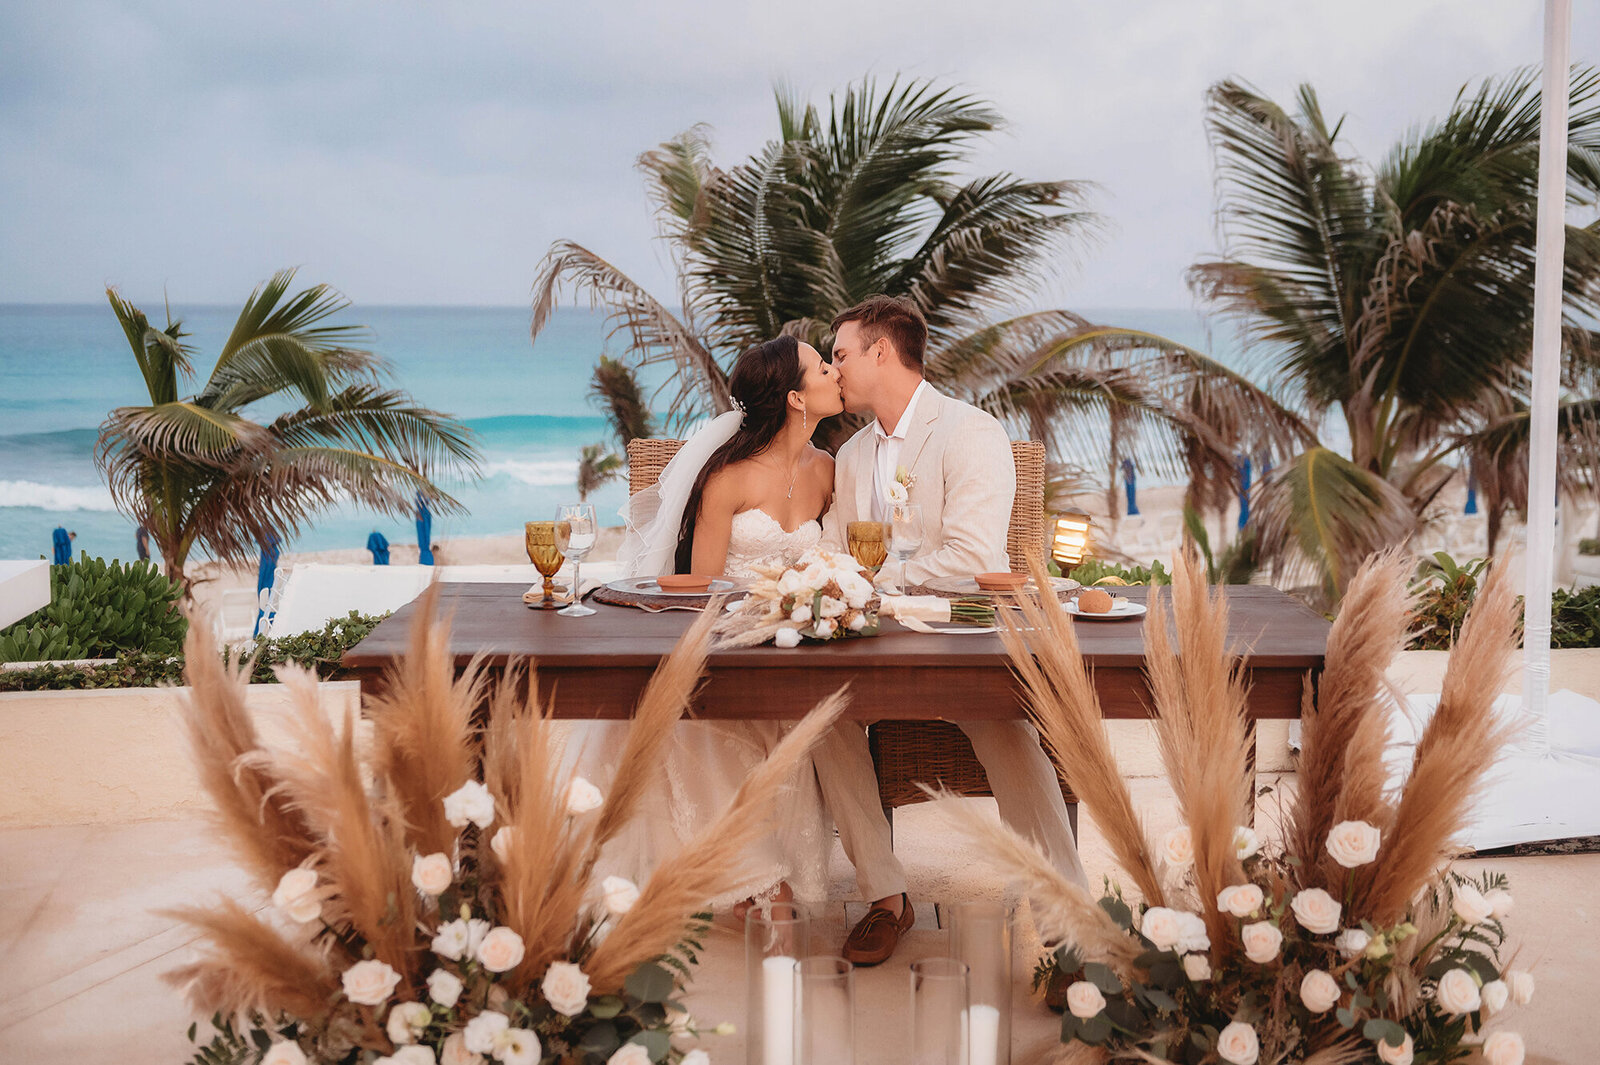 Newlyweds kiss during their Micro-Wedding Reception at Live Aqua Resort in Cancun, Mexico.